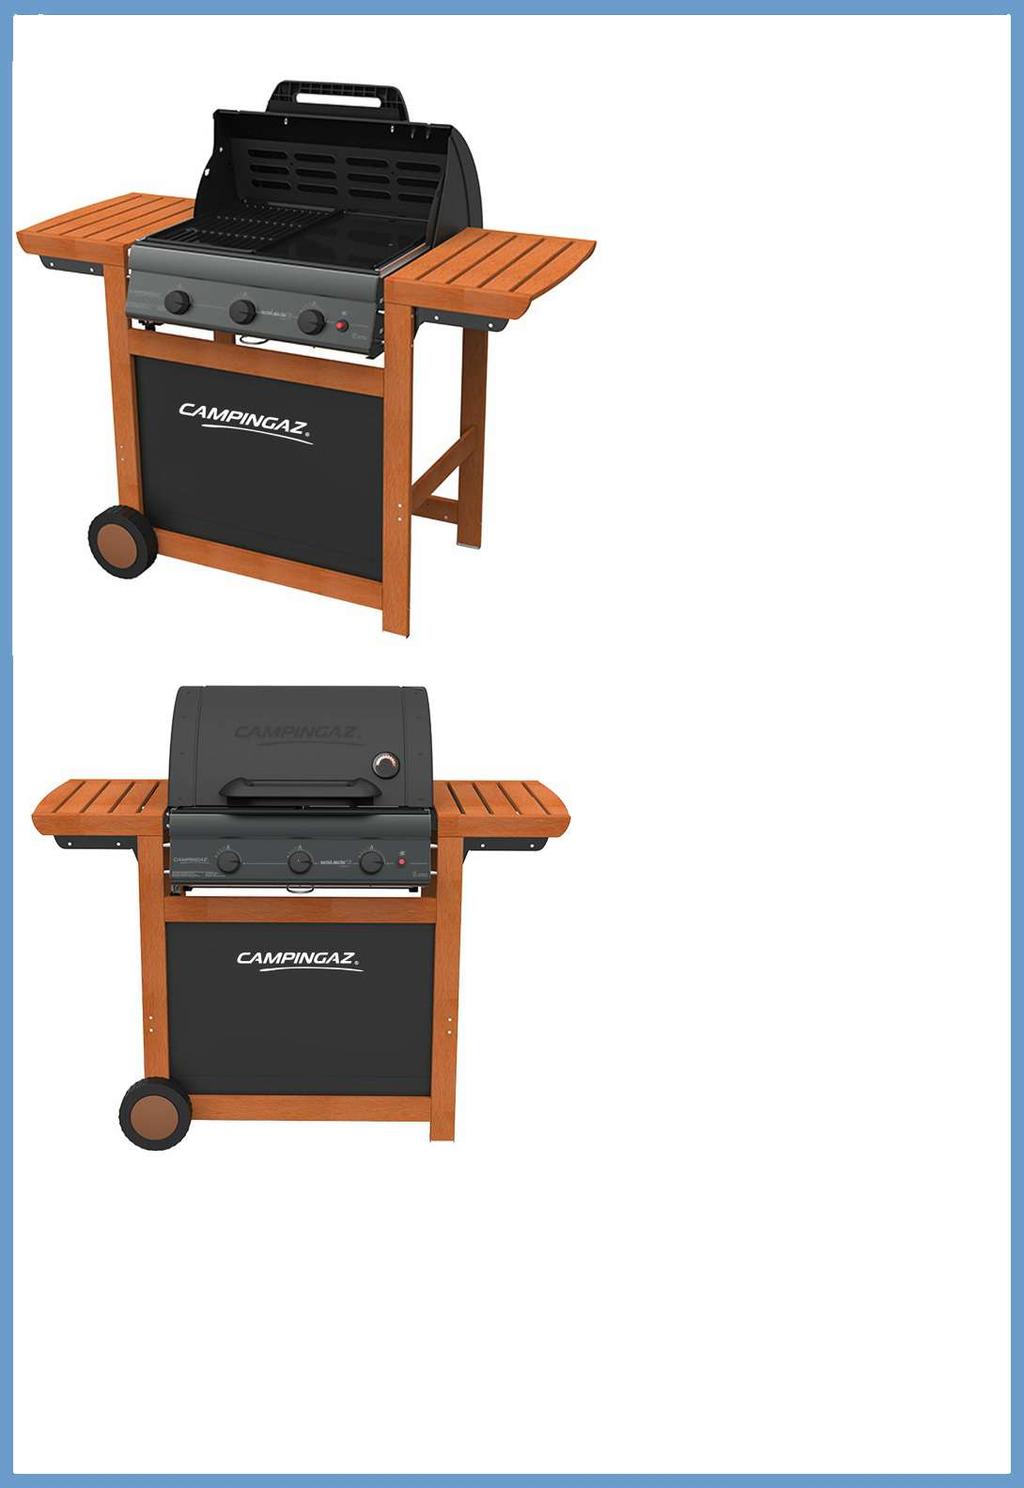 CAMPINGAZ ADELIADE 3 SERIES WOODY L Cooking surface dimensions (cm²): 2,800 Burner: Cast Iron Number of burners: 3 Power: 14 kw Gas consumption: 830g/h Cooking surface material: Enameled Stamped